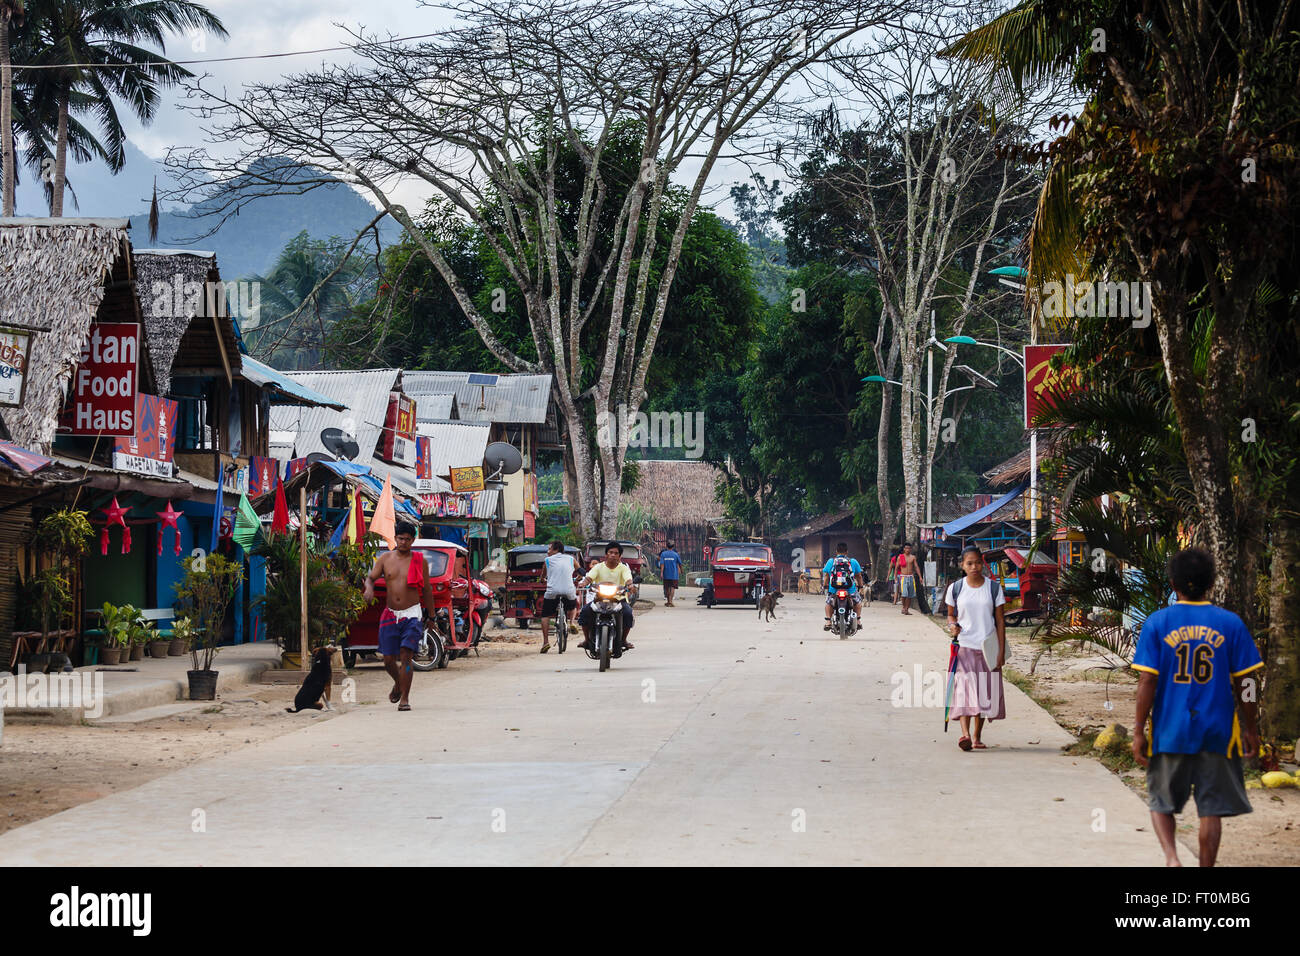 Village street scene on Leyte island, Philippines,  showing native stores and people walking and riding Stock Photo